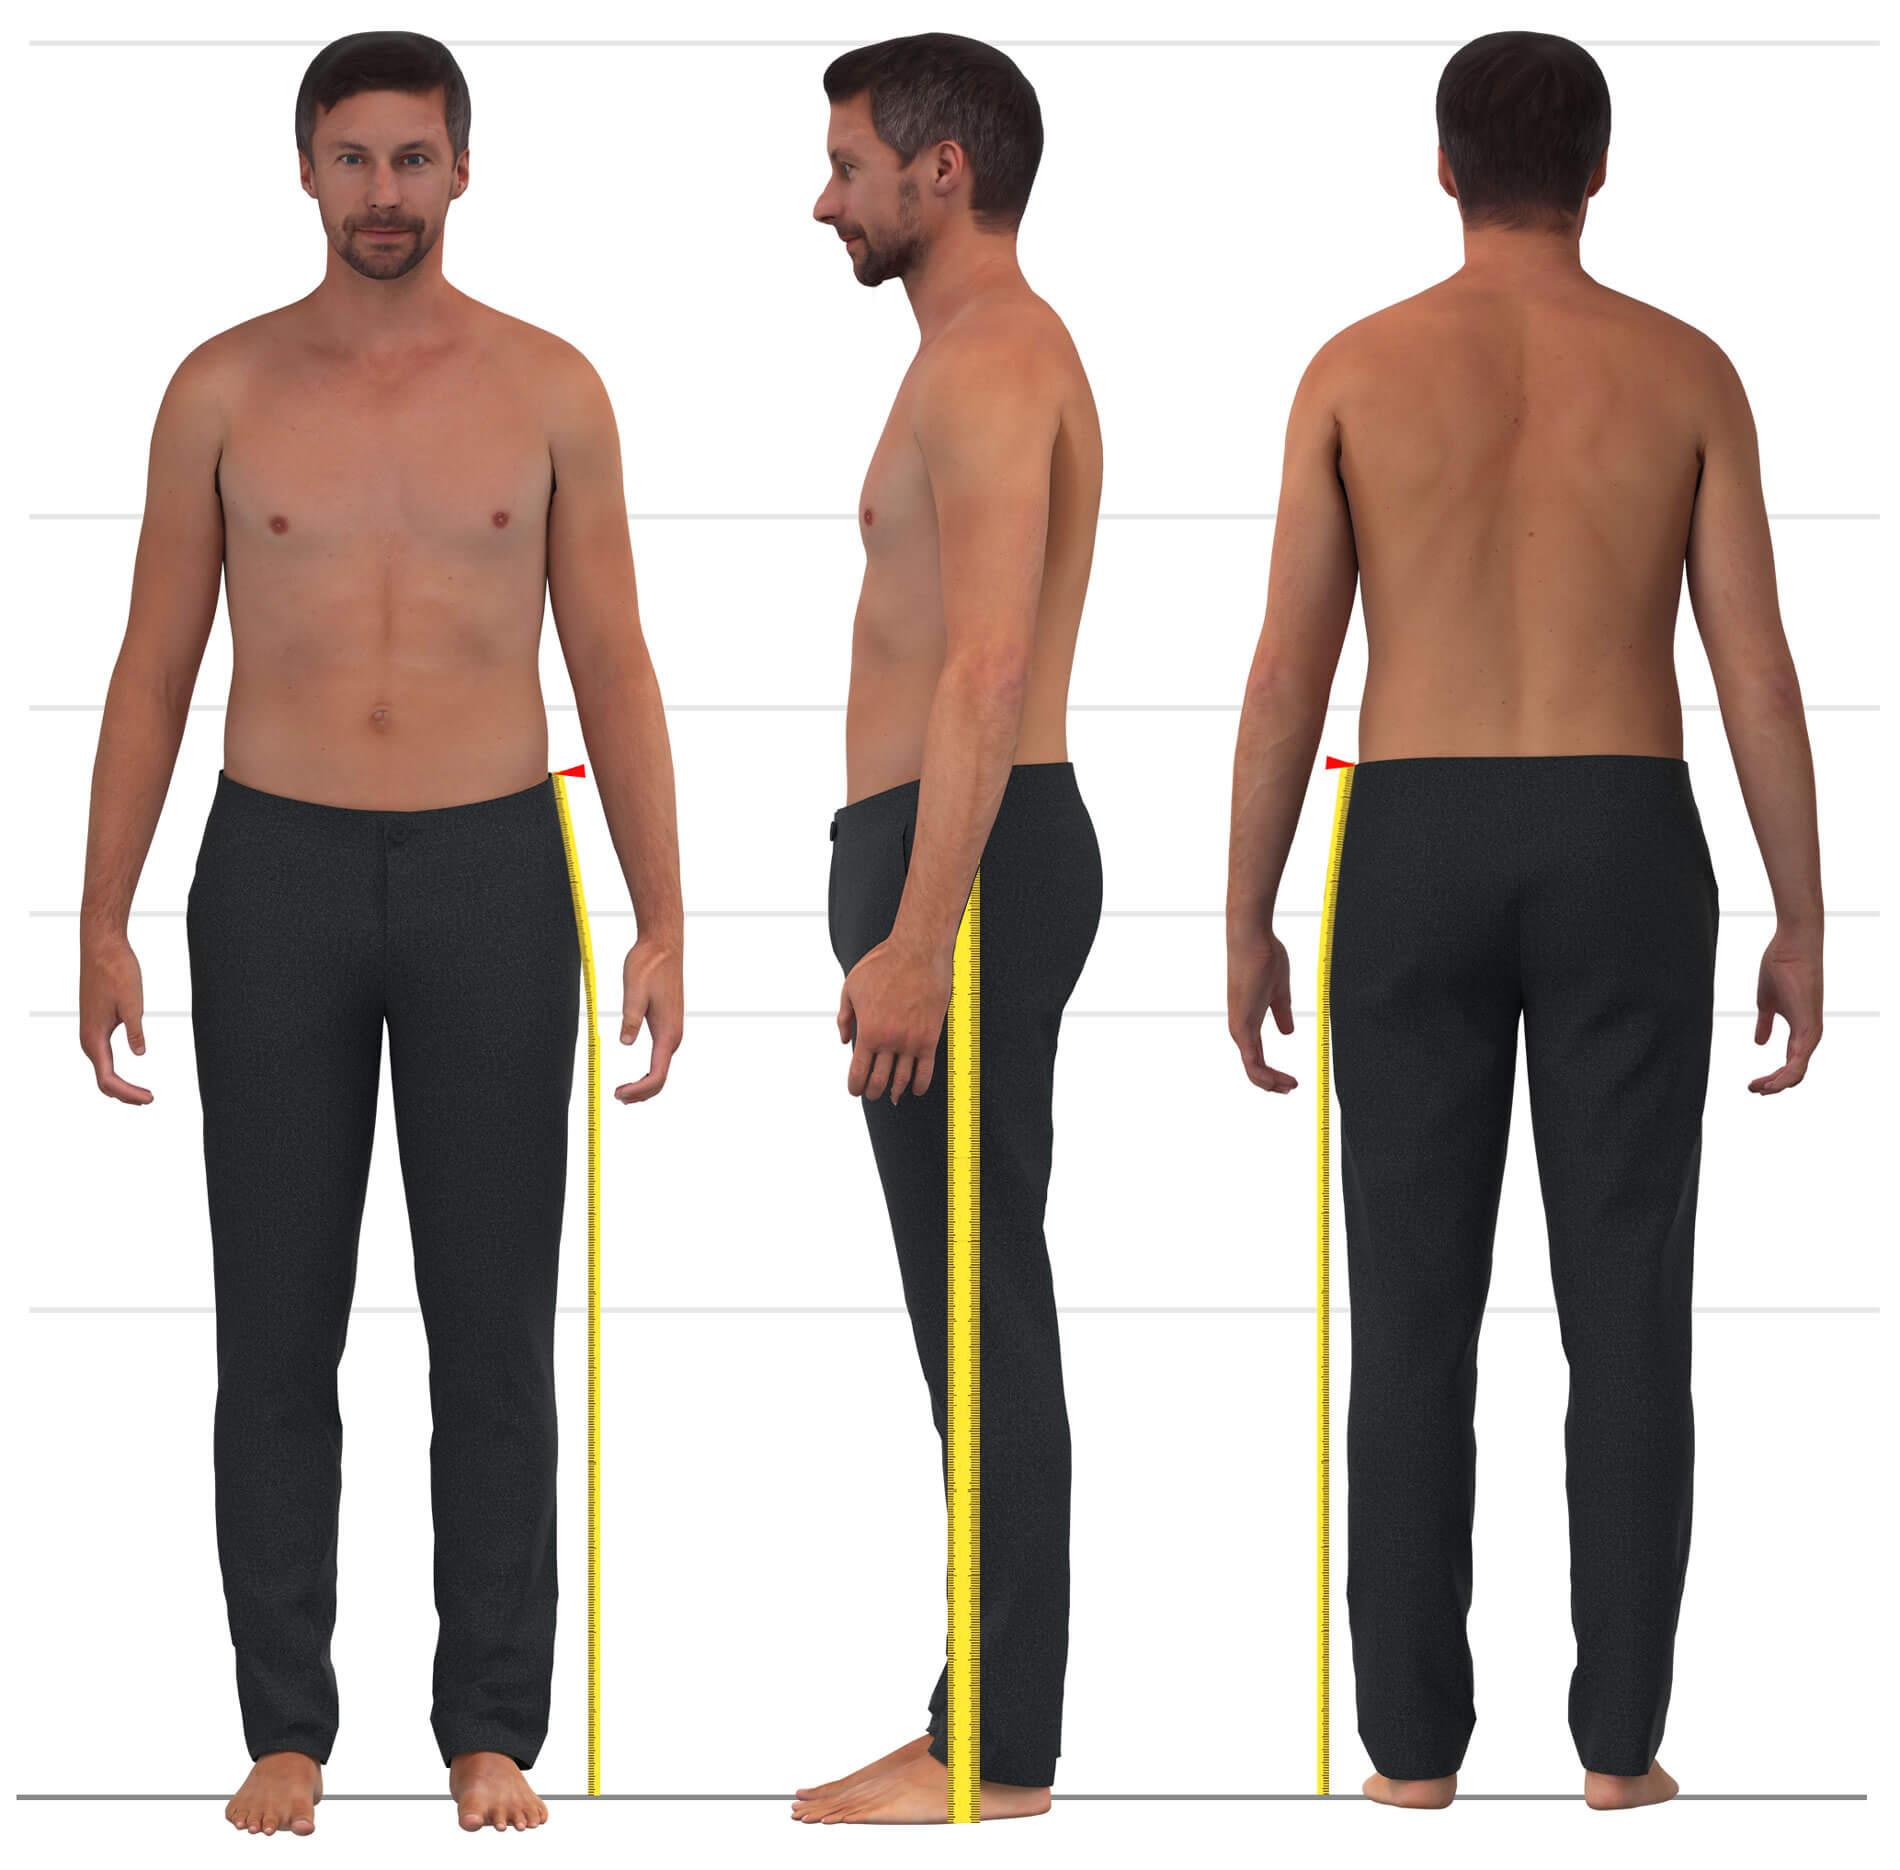 The picture shows the measurement of the side length for men's pants.